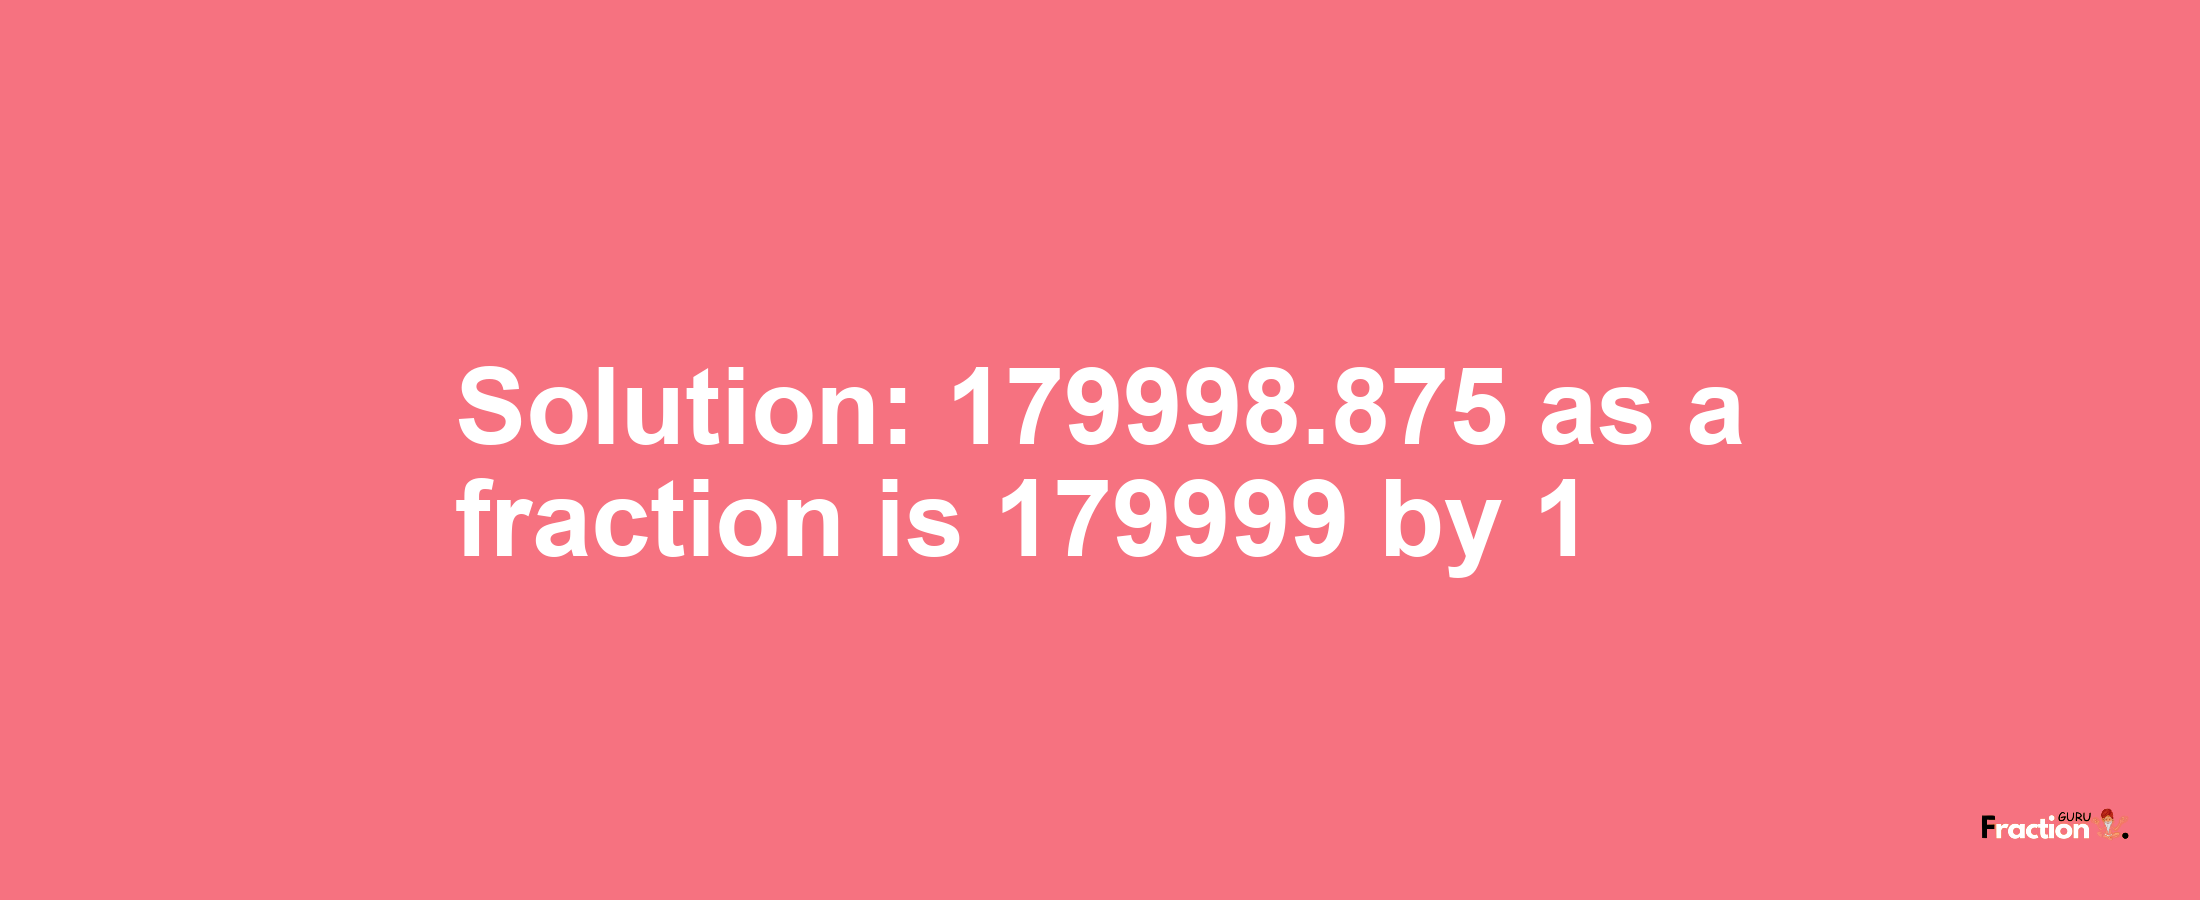 Solution:179998.875 as a fraction is 179999/1